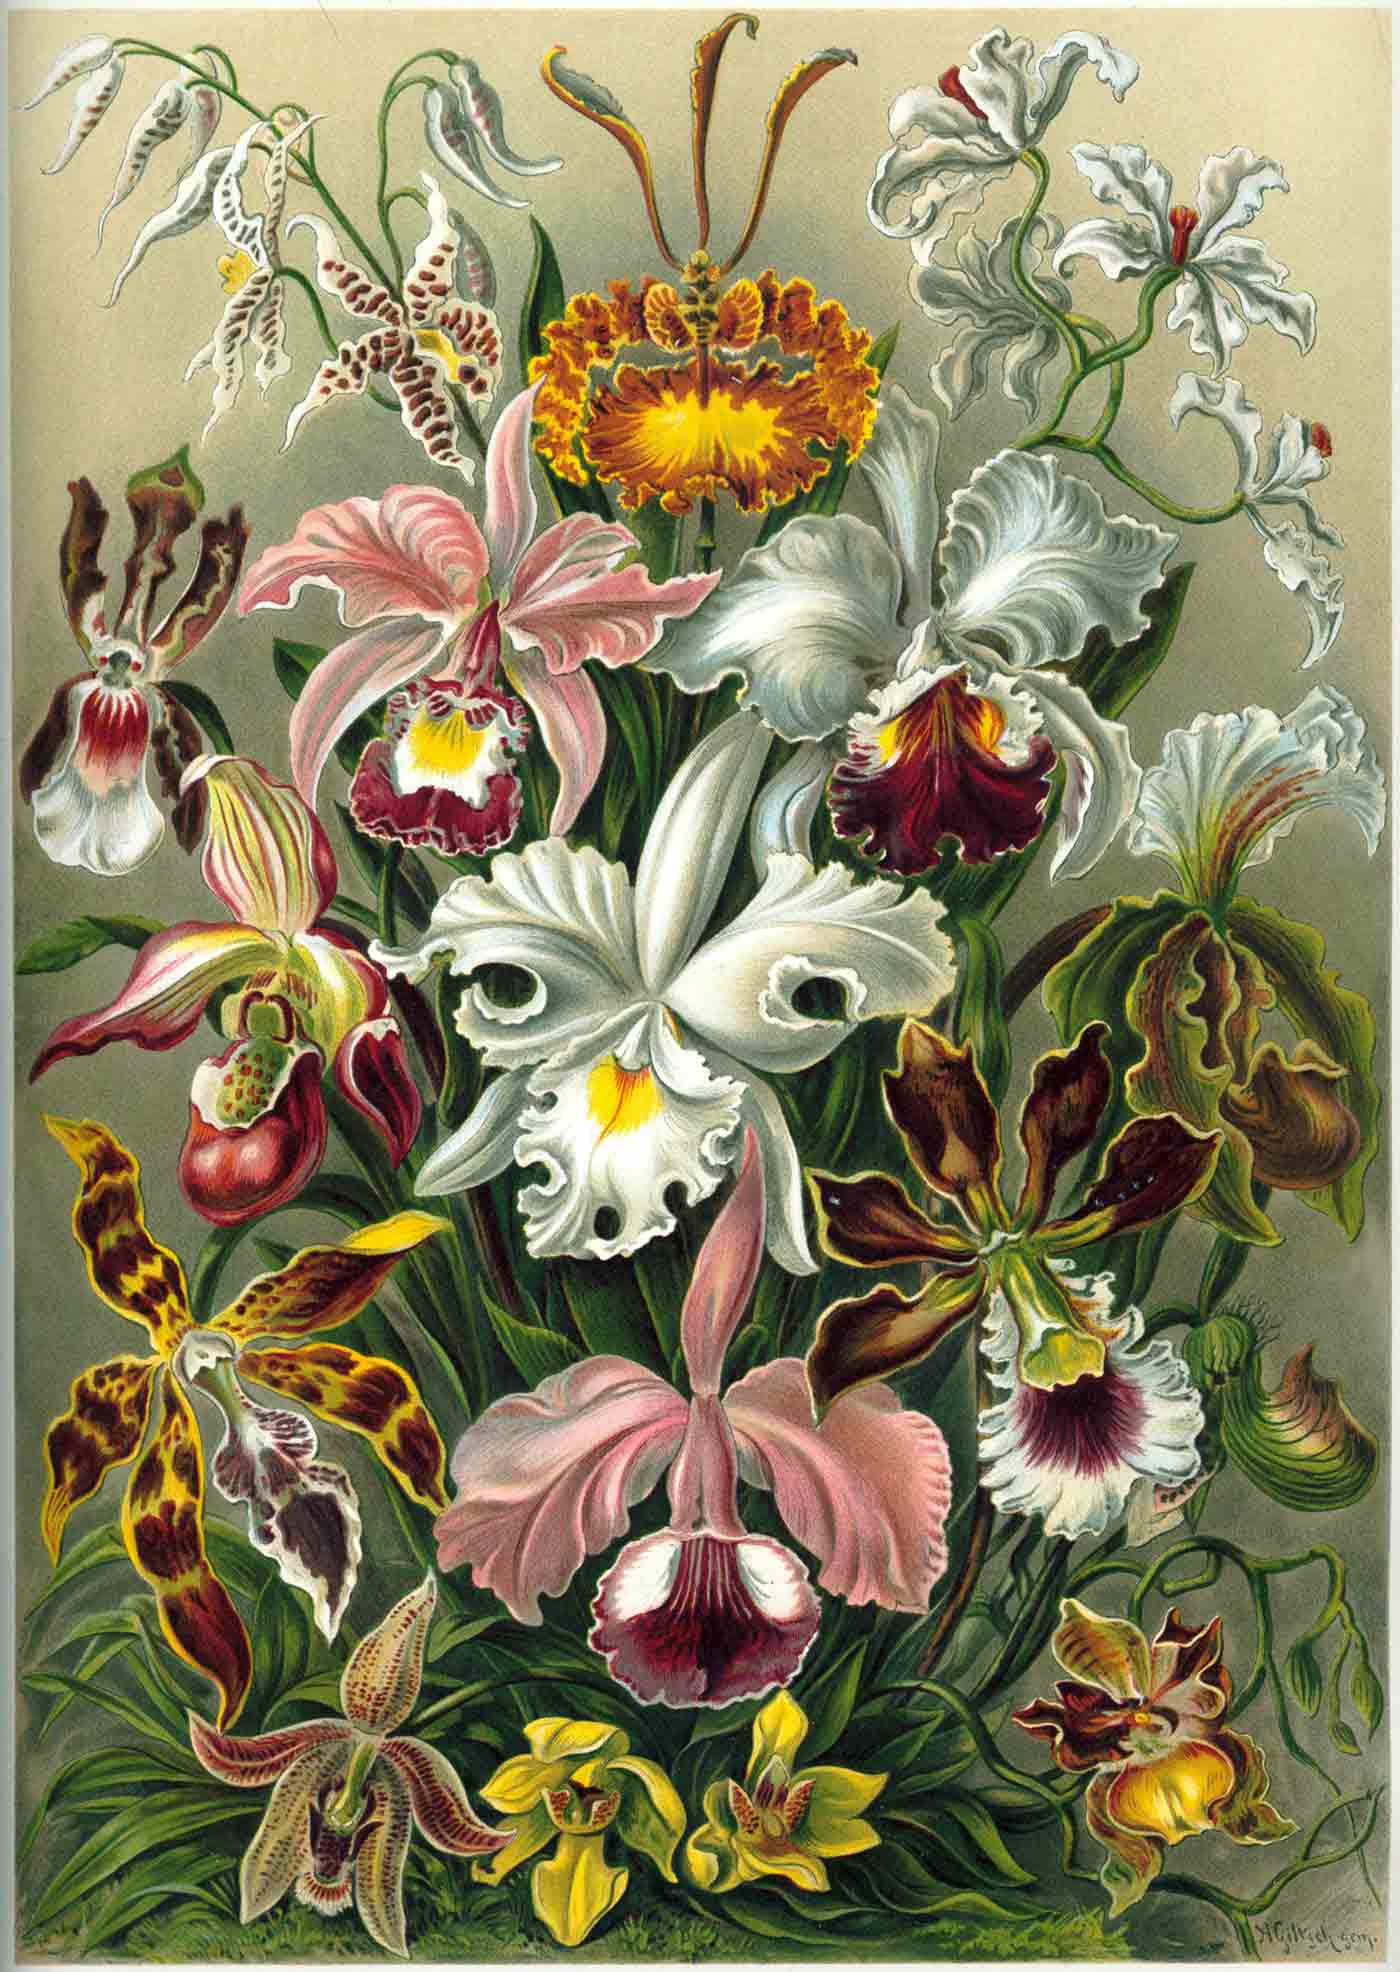 From from Ernst Haeckel's "Kunstformen der Natur" of 1899. Darwin noted that orchids exhibit a variety of complex adaptations to ensure pollination.